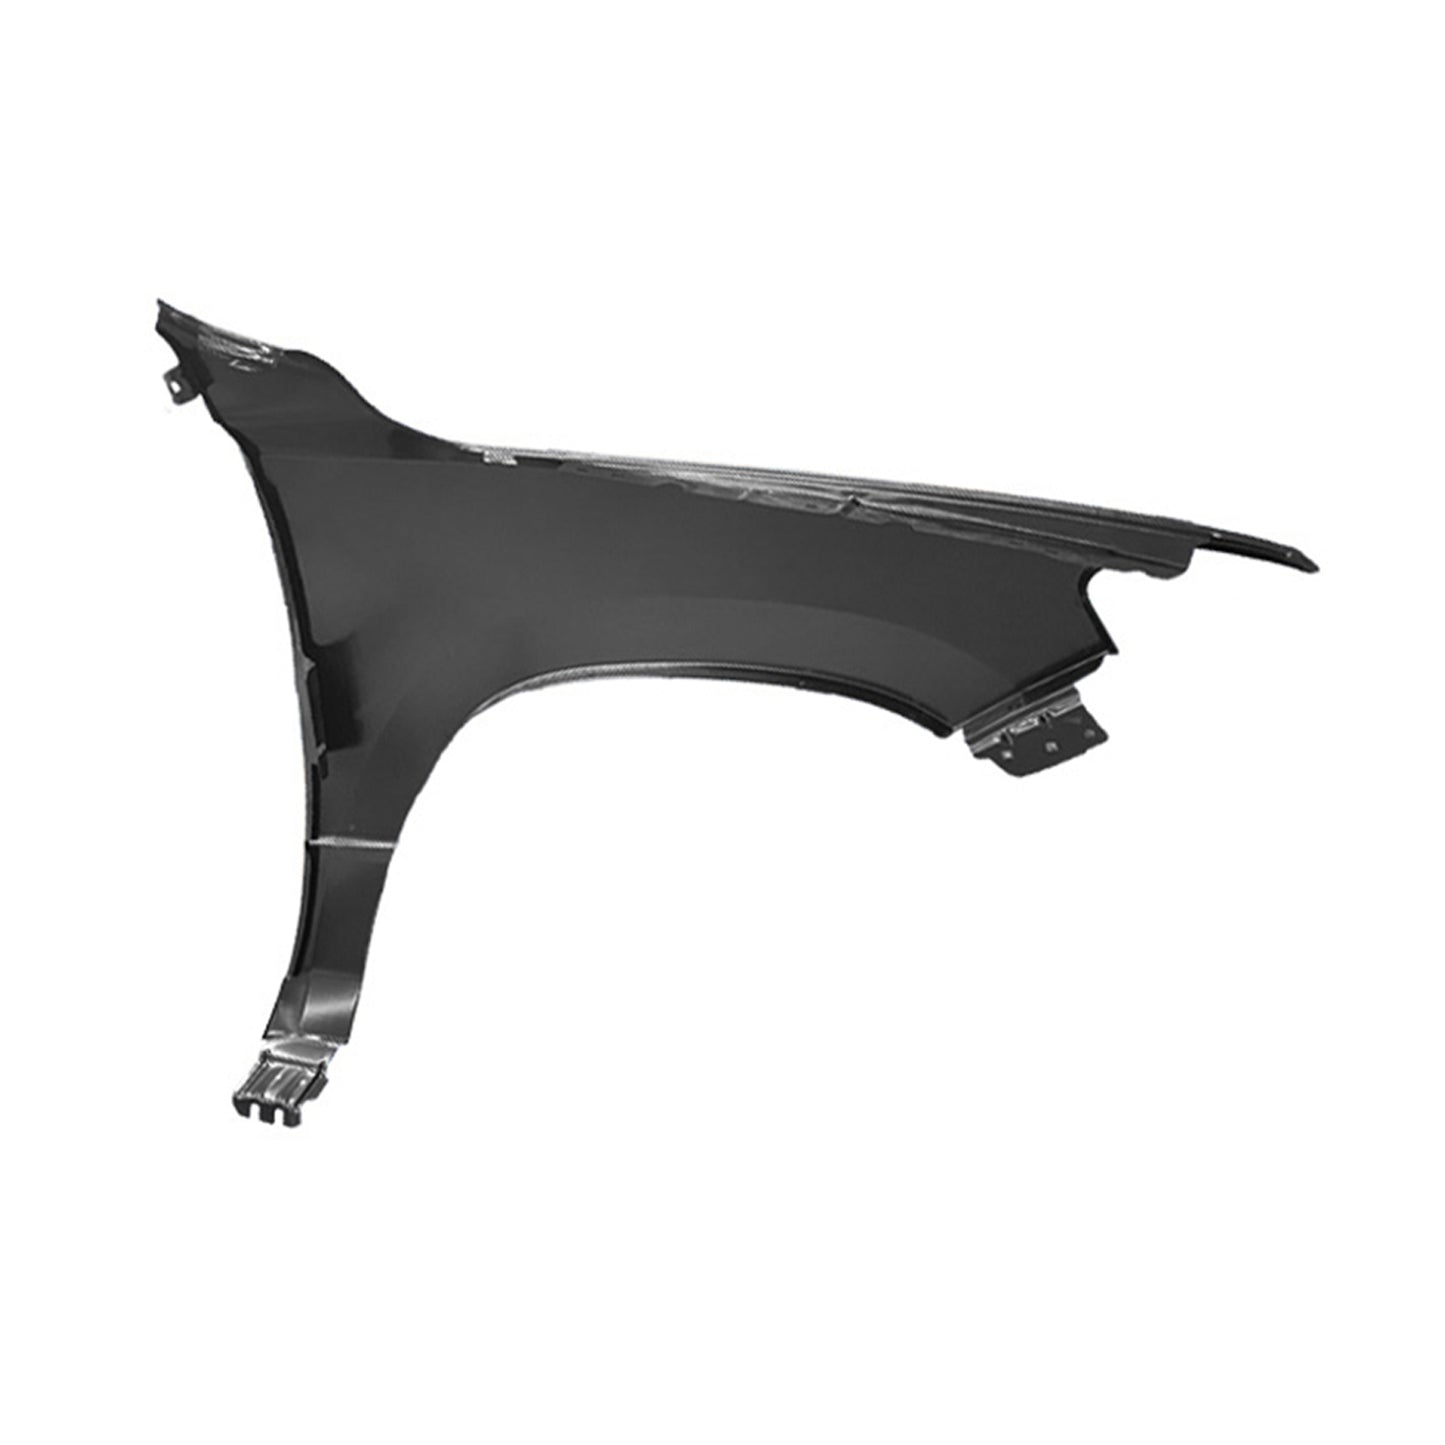 Replacement FRONT FENDER, LH W/O HOLE, 2019-2022 Ram 1500, (Steel)